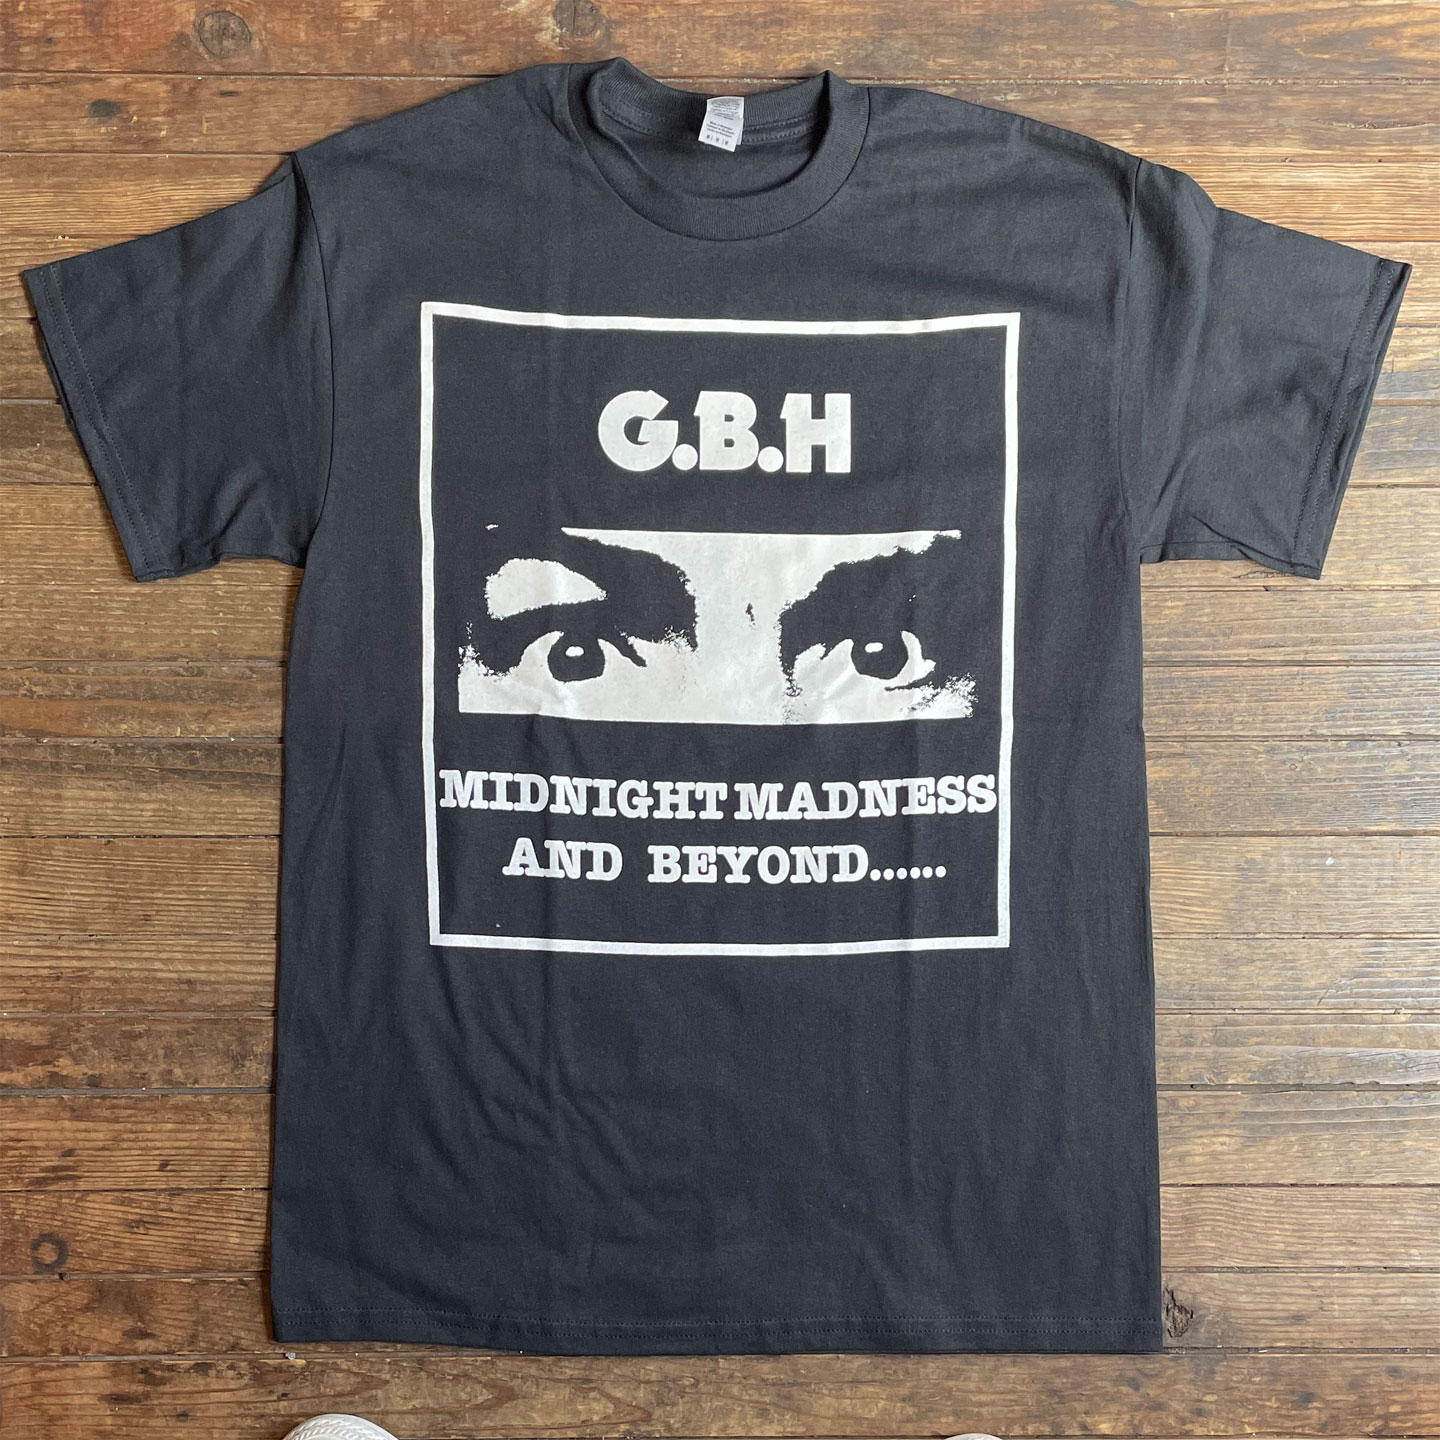 G.B.H Tシャツ MIDNIGHT MADNESS AND BEYOND...